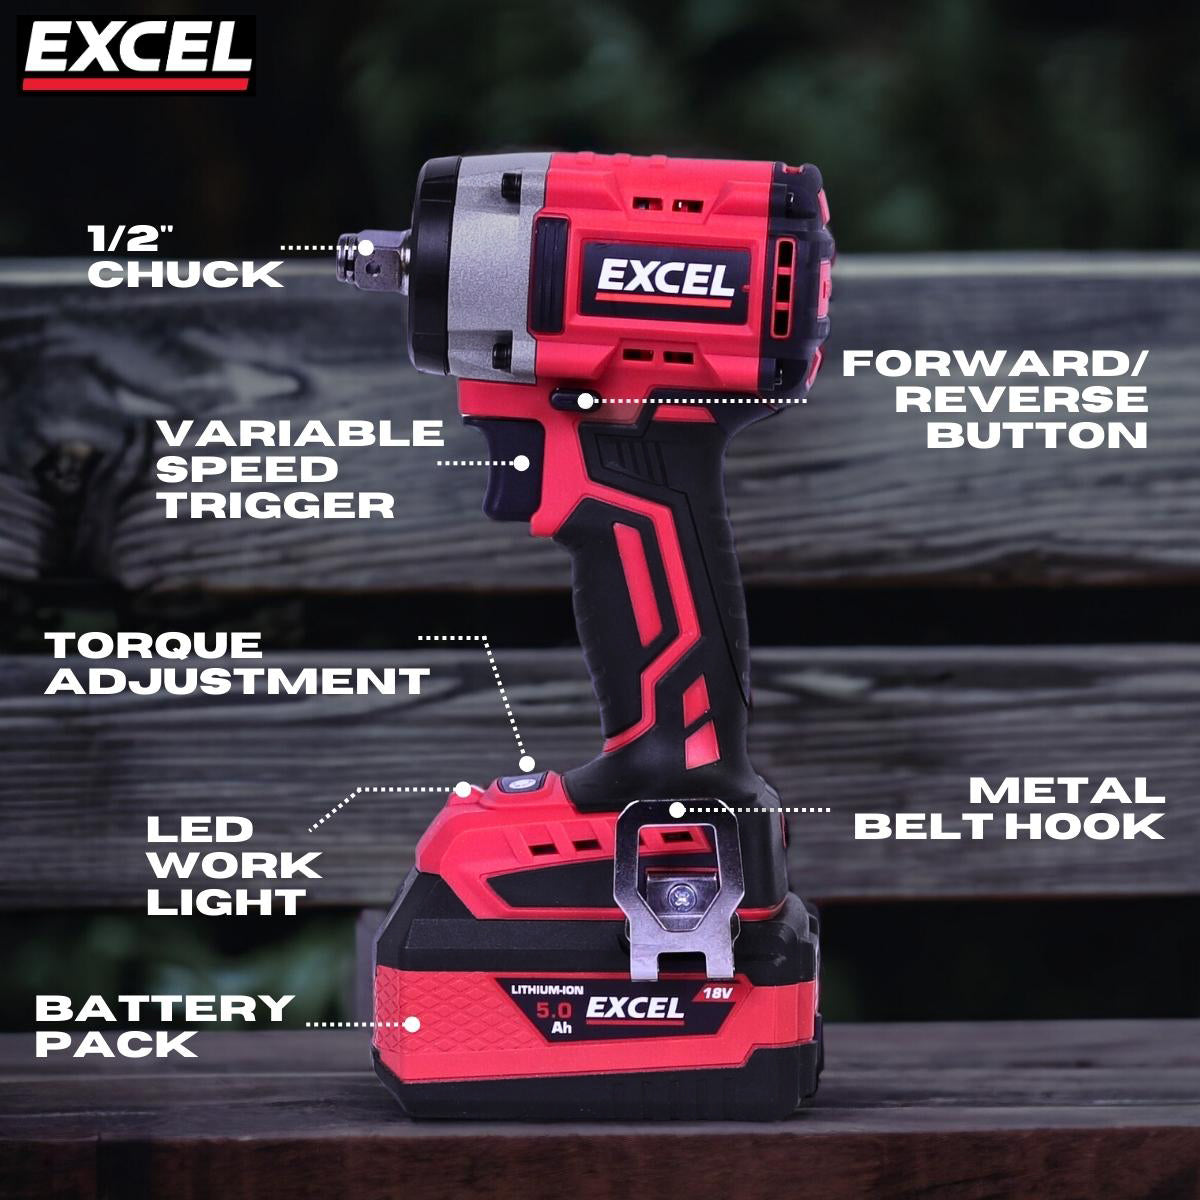 Excel 18V 10 Piece Power Tool Kit with 4 x 5.0Ah Batteries & Charger EXLKIT-16296